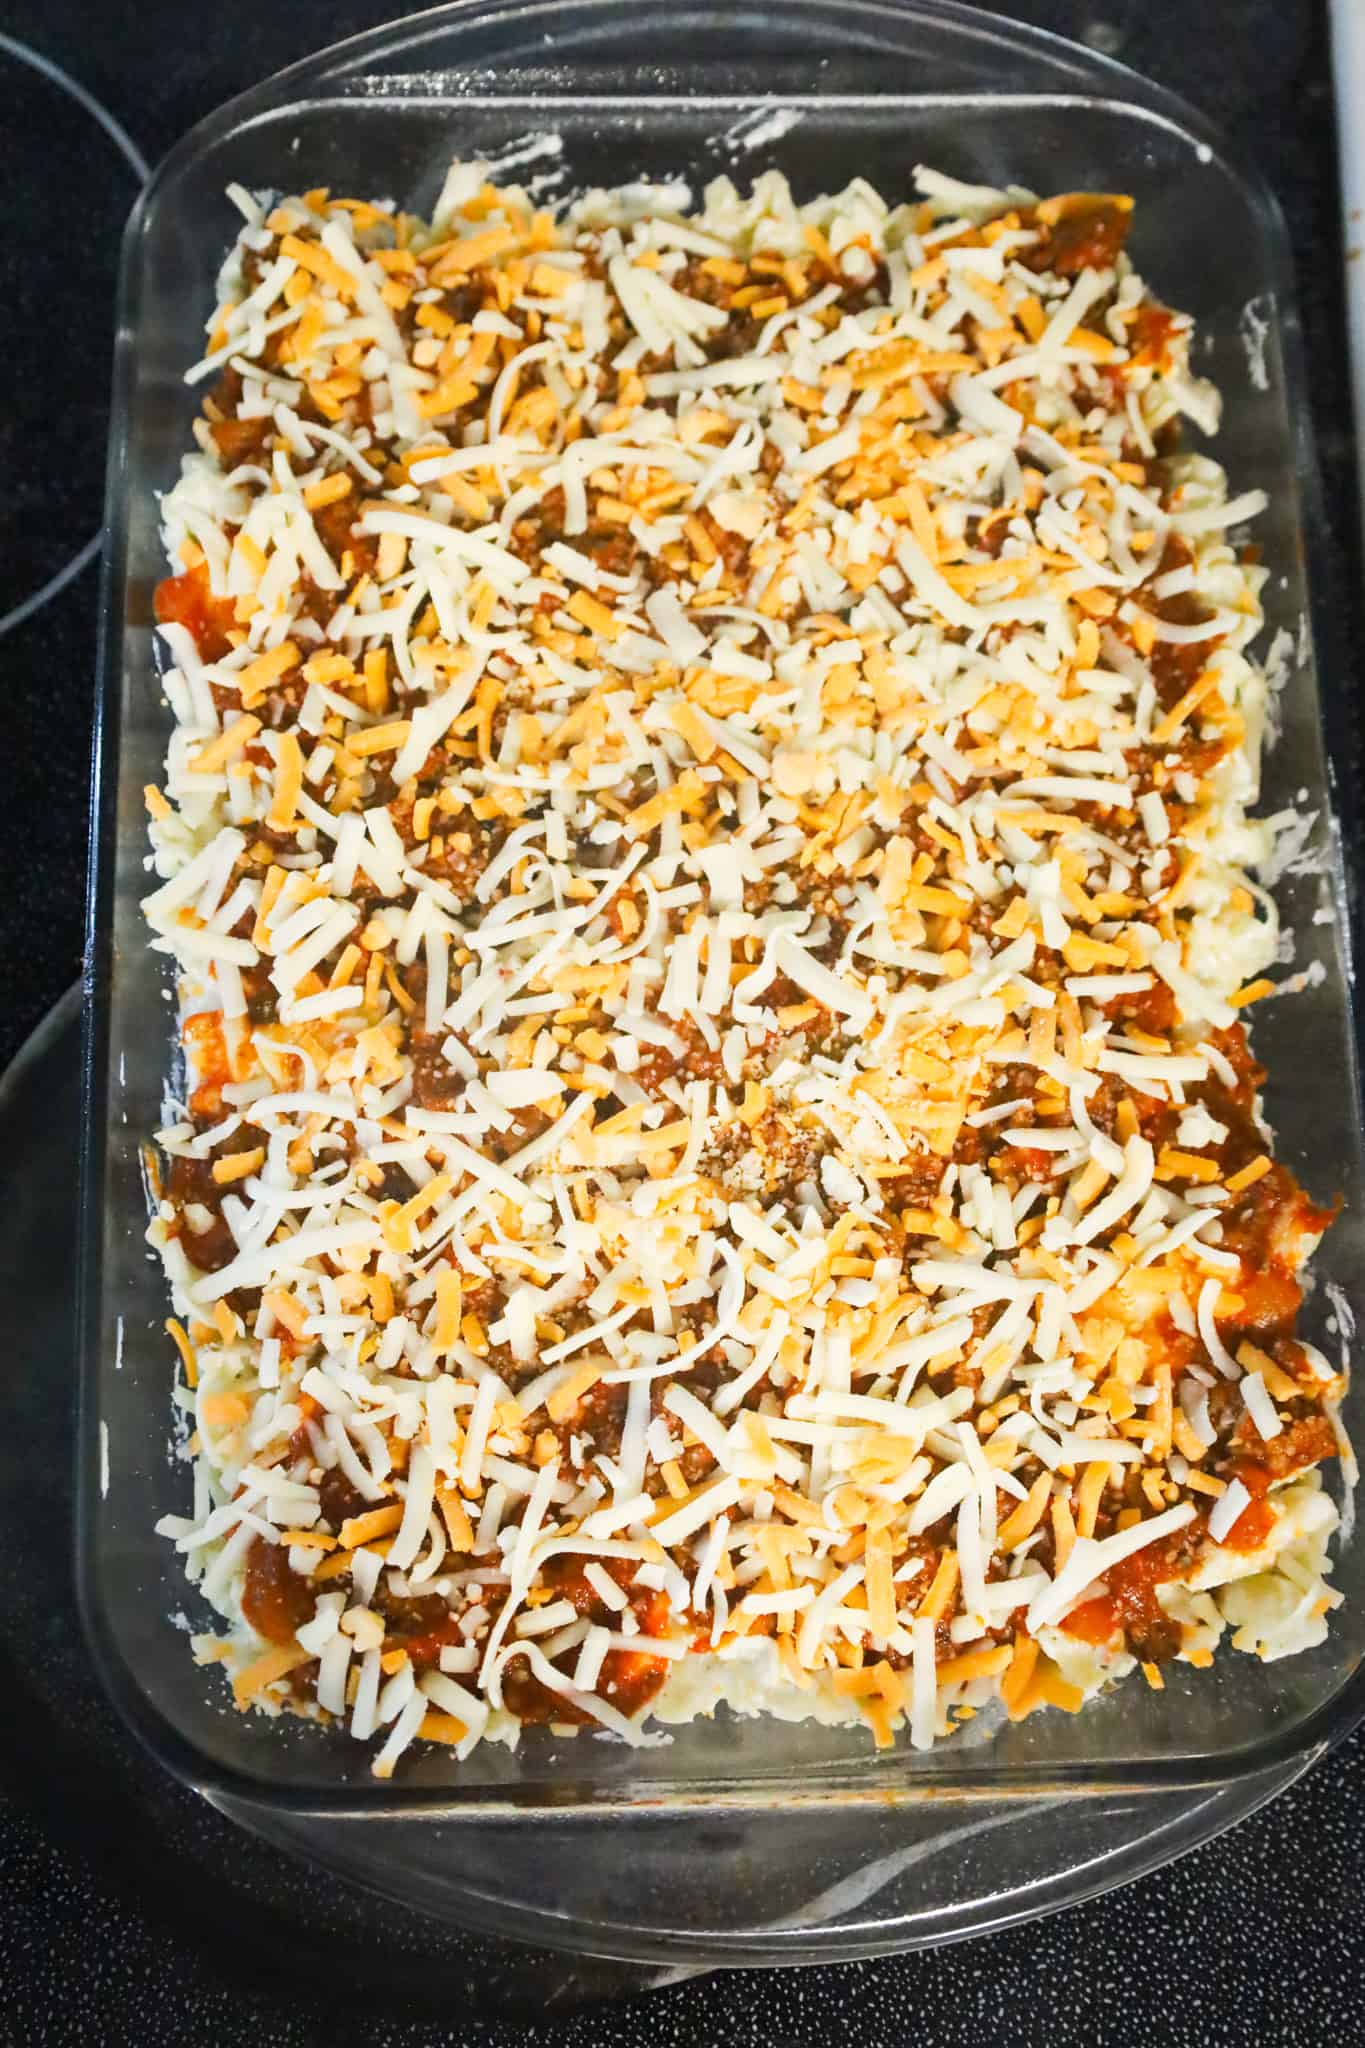 shredded mozzarella and cheddar on top of noodle mixture in a baking dish